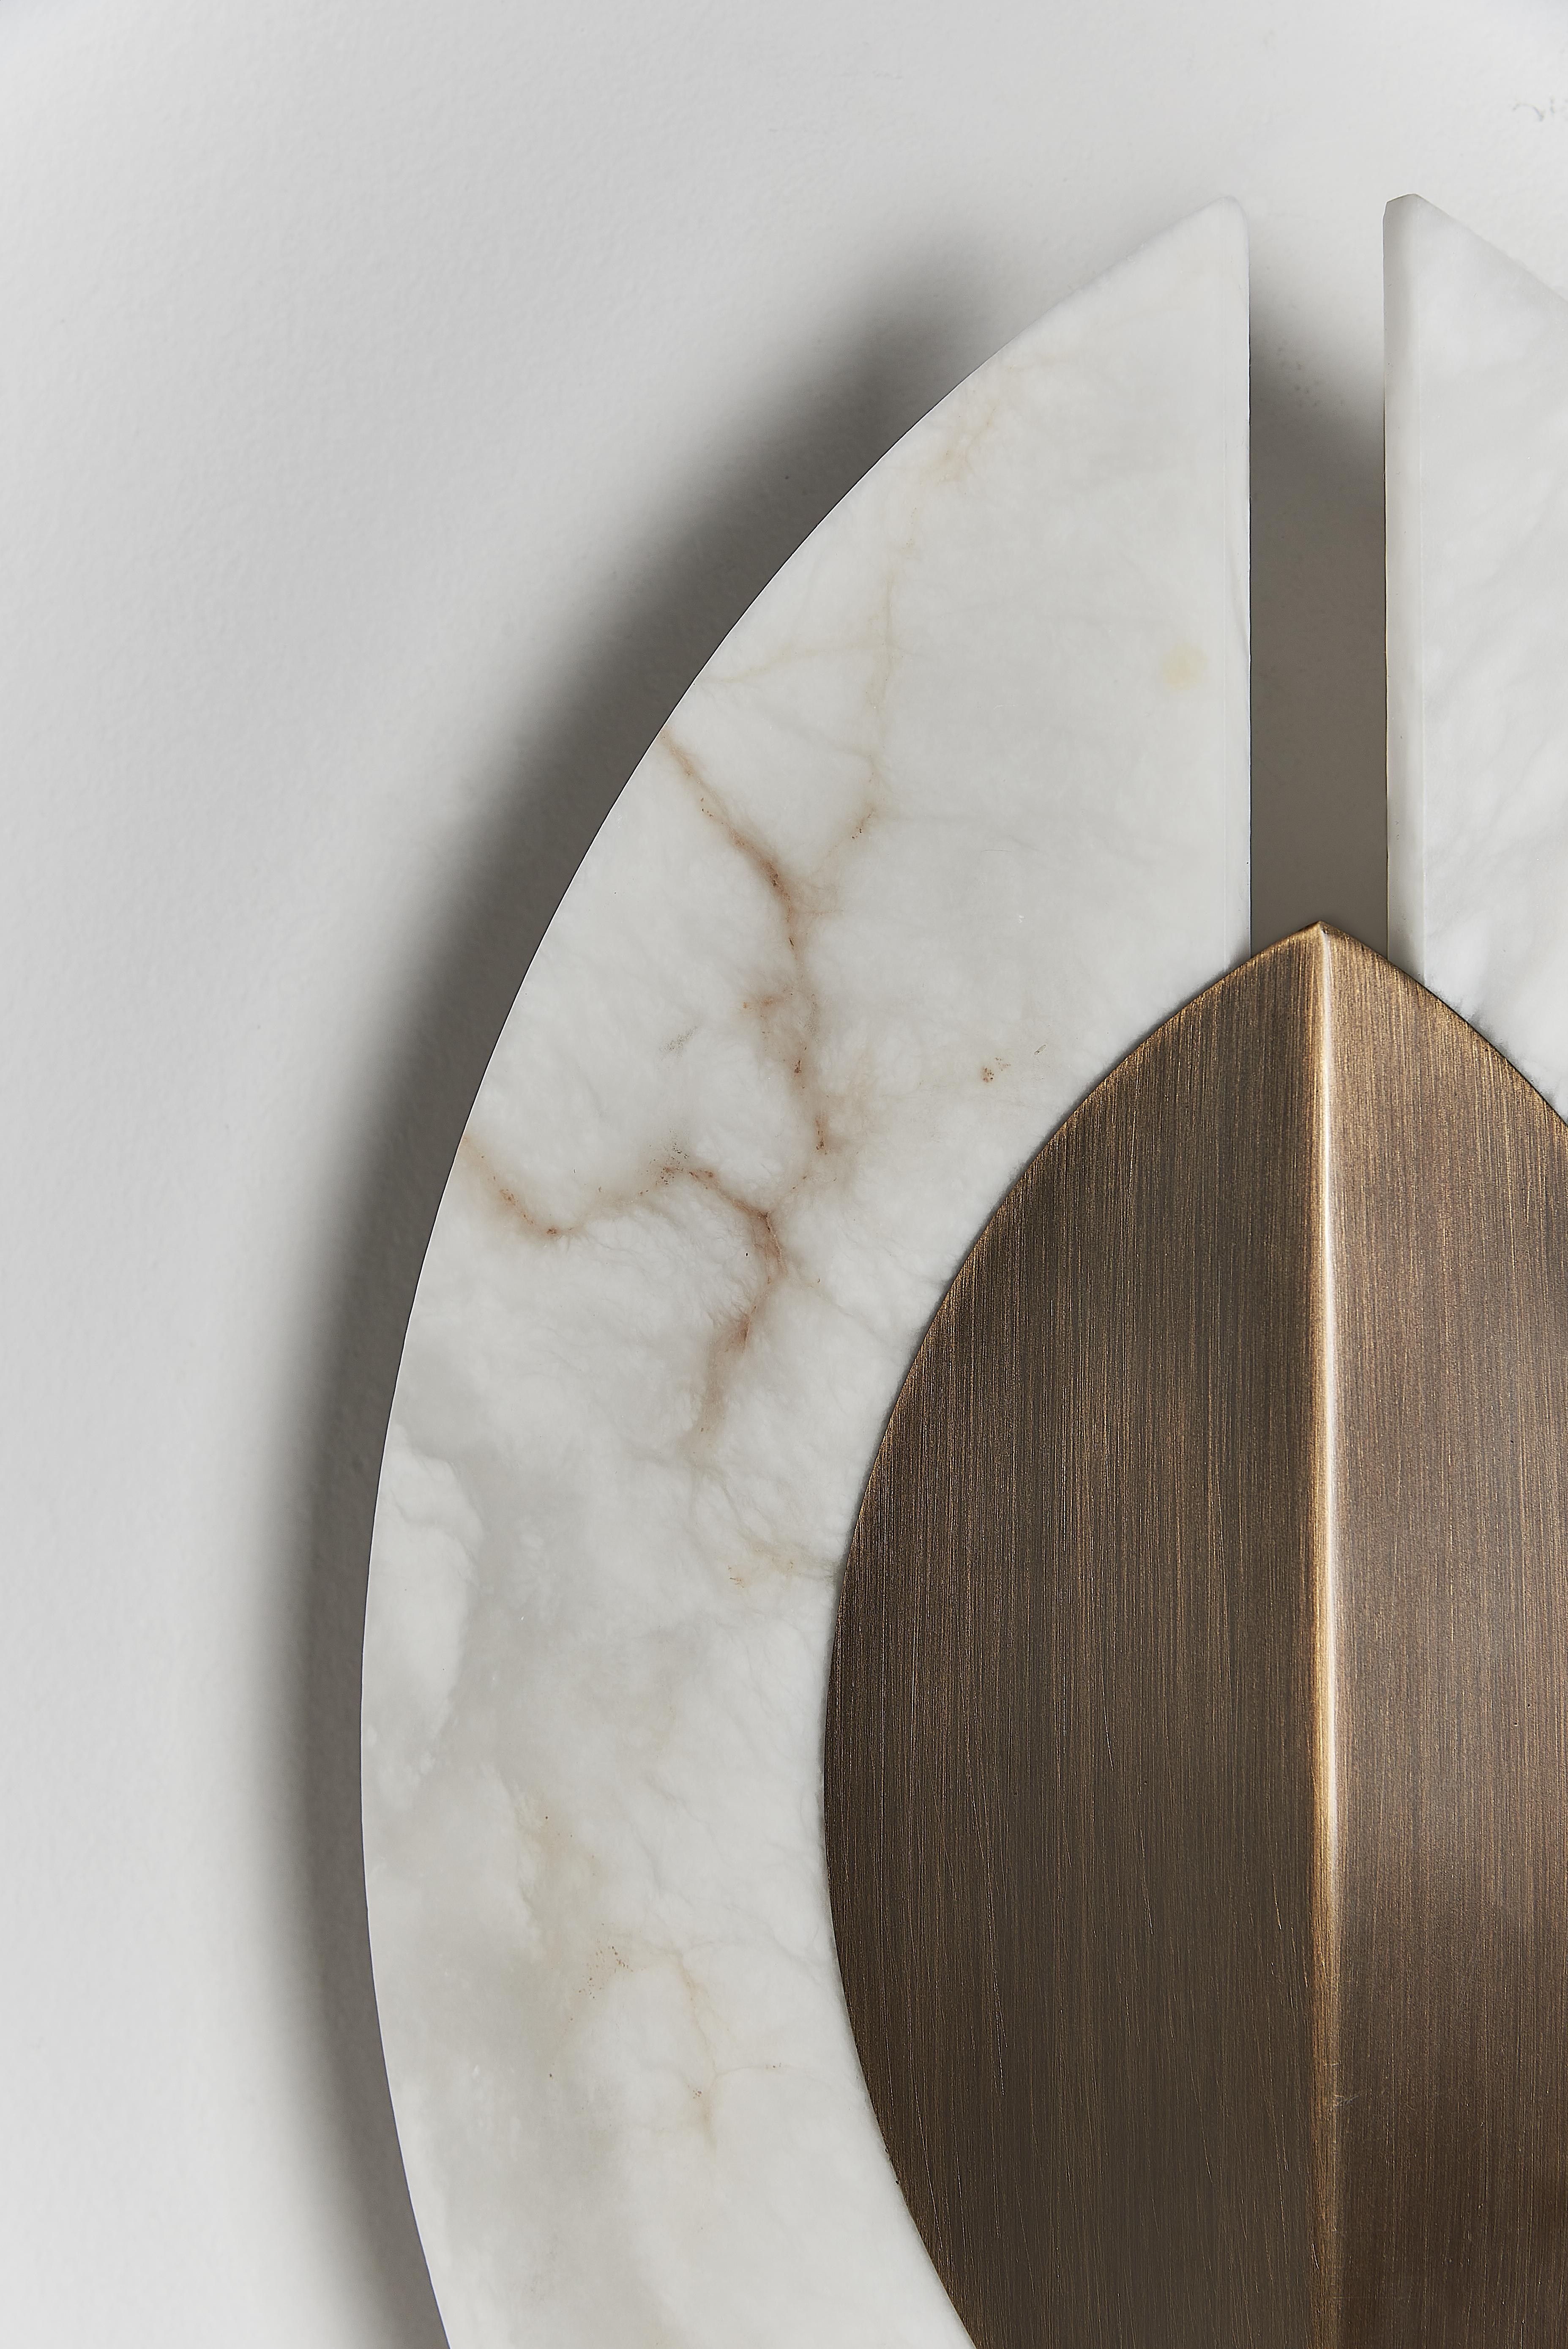 Shields wall sconce is a carefully crafted piece that combines elements of history, culture, and natural materials. The brushed bronze and alabaster materials create a tactile and visual experience that evokes the ancient shields of warriors, while